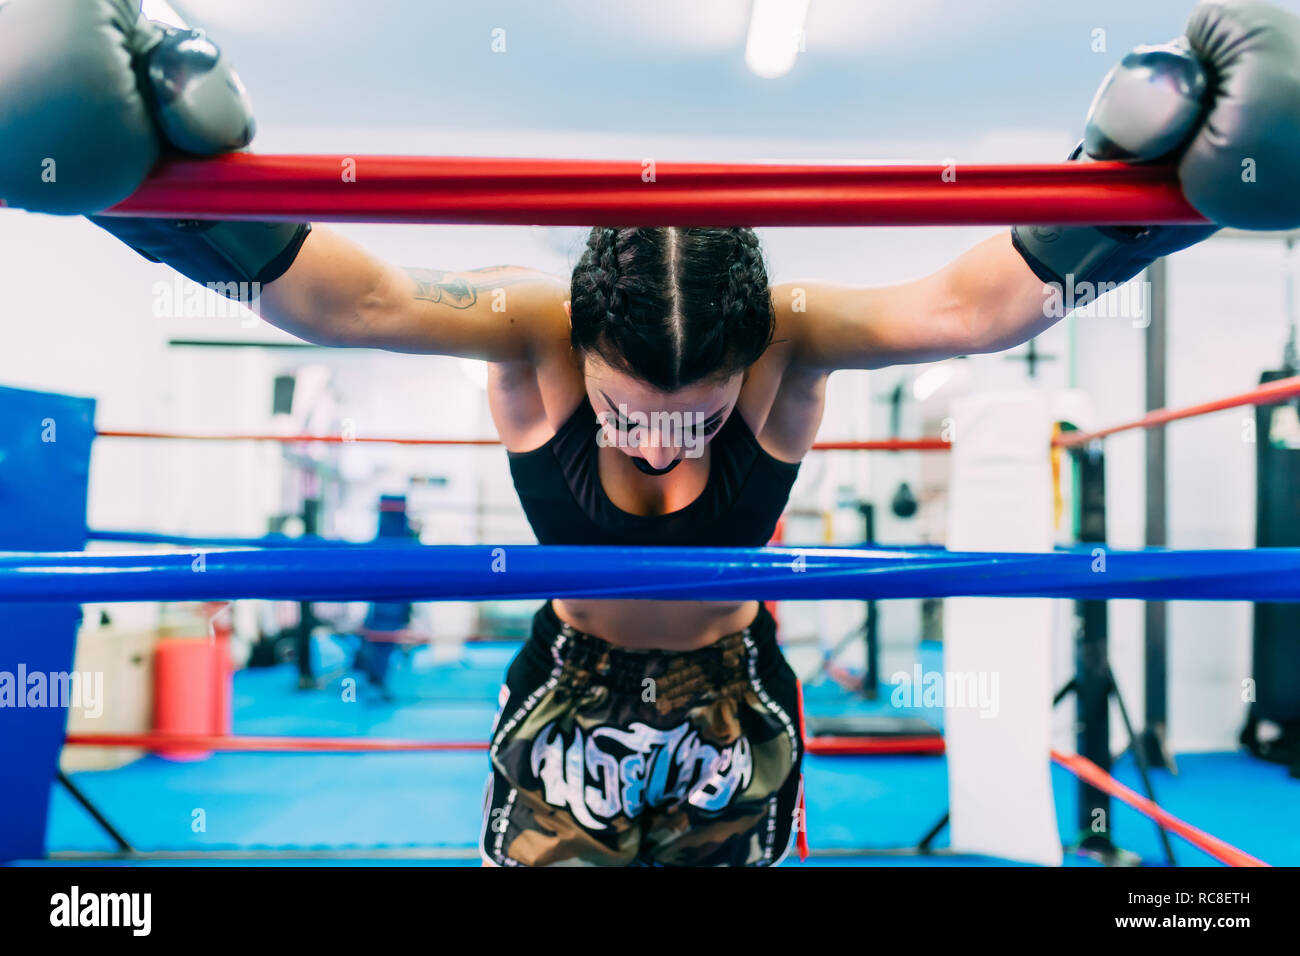 Exhausted female boxer leaning over boxing ring ropes Stock Photo